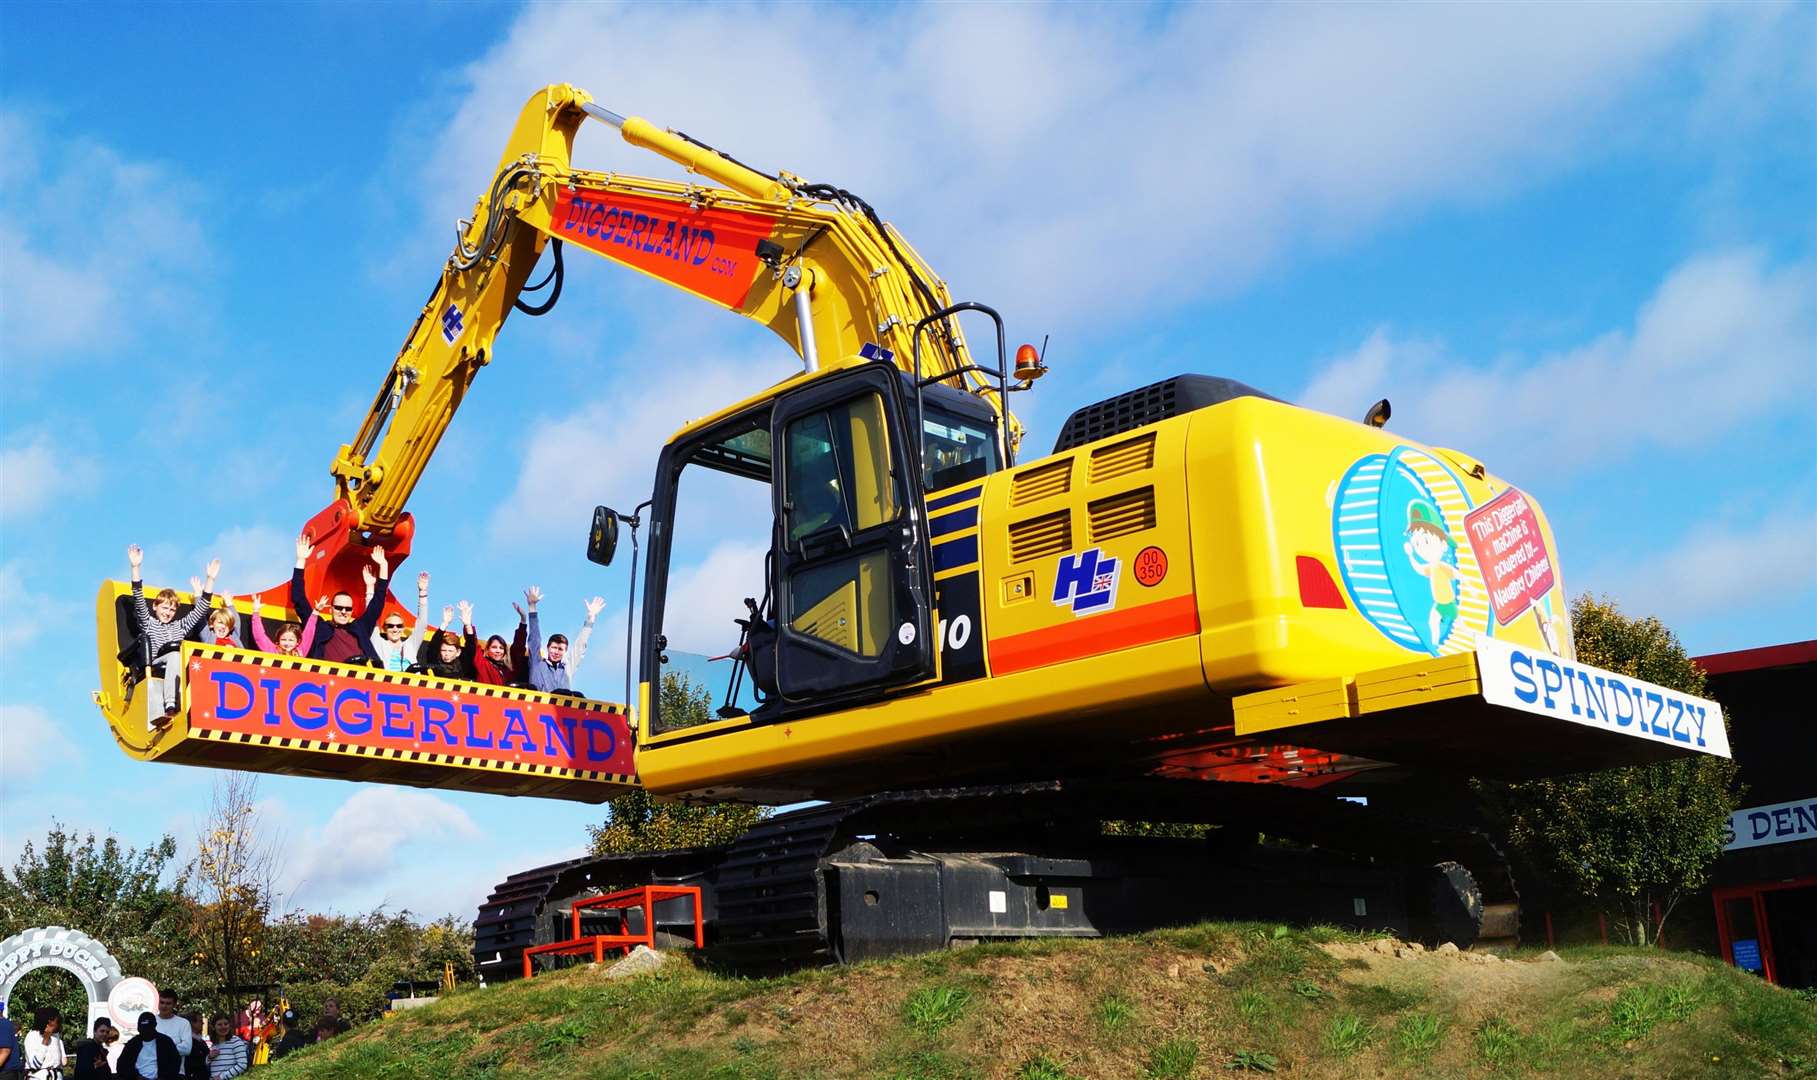 Head to Diggerland in Strood this summer